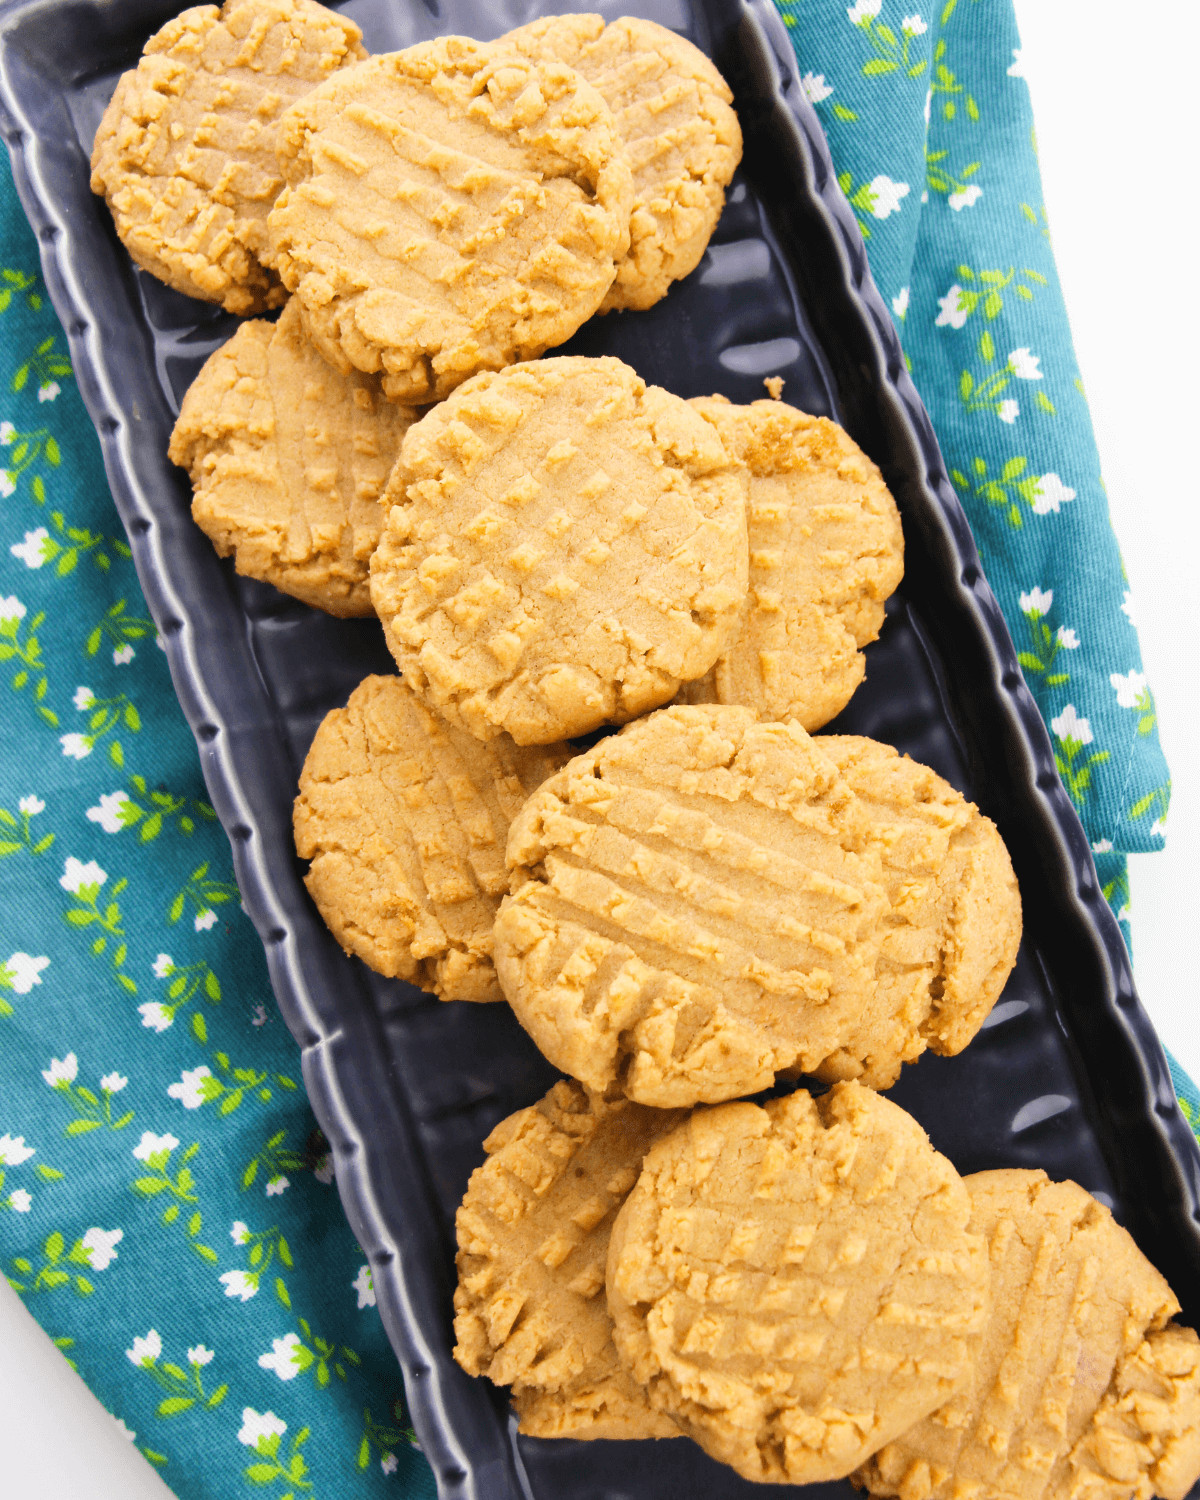 A large tray of the large jif peanut butter cookies.